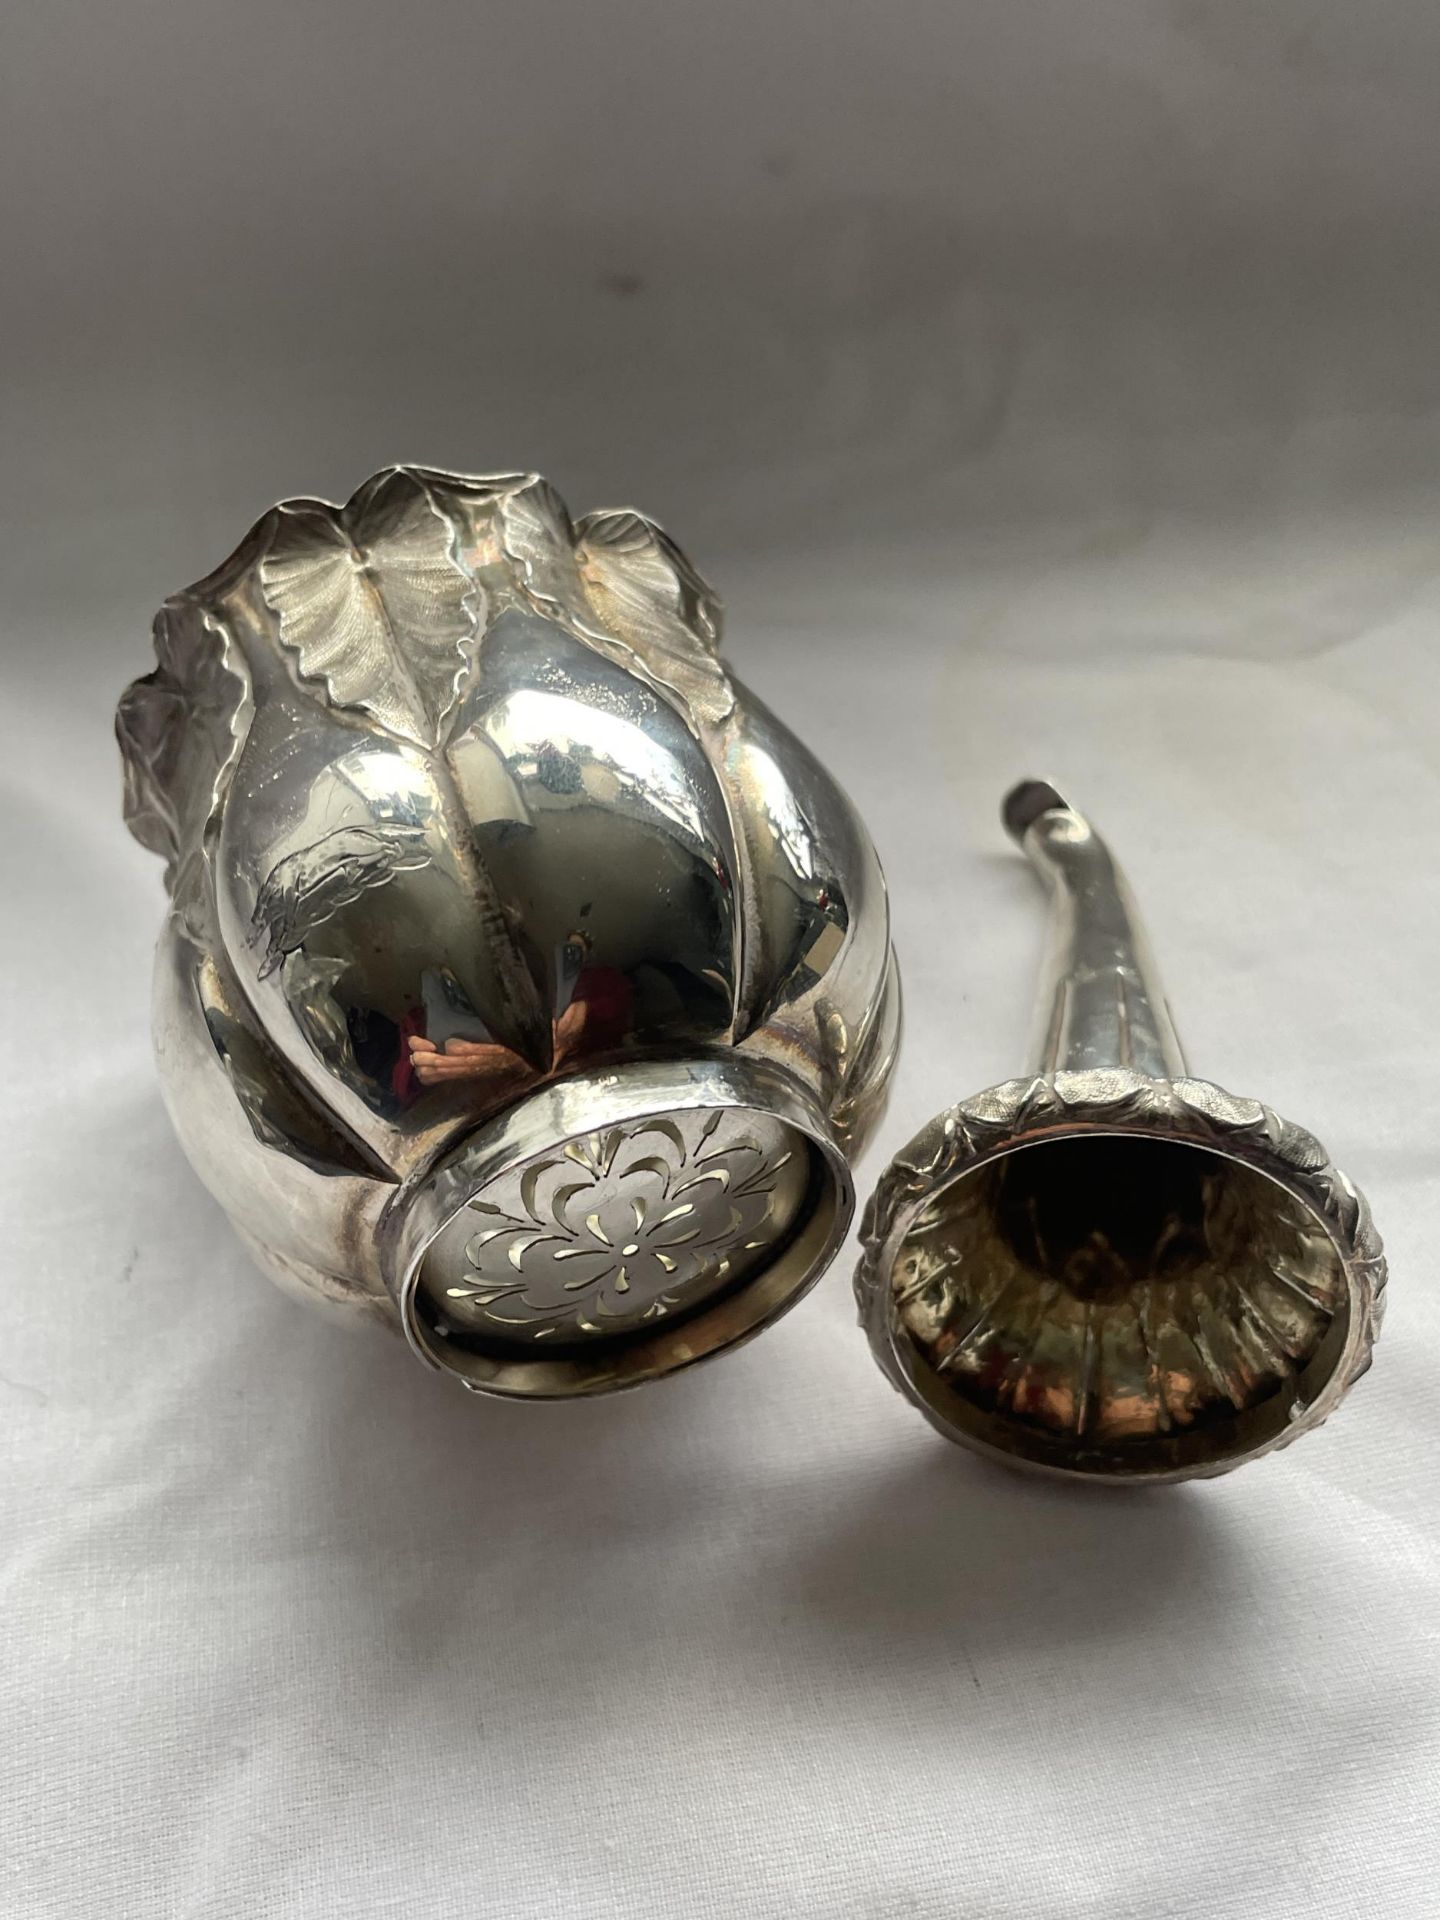 A GEORGIAN HALLMARKED SILVER TWO PIECE ROSE DESIGN FUNNEL, MARKS INDISTINCT, WEIGHT 131 GRAMS - Image 11 of 18